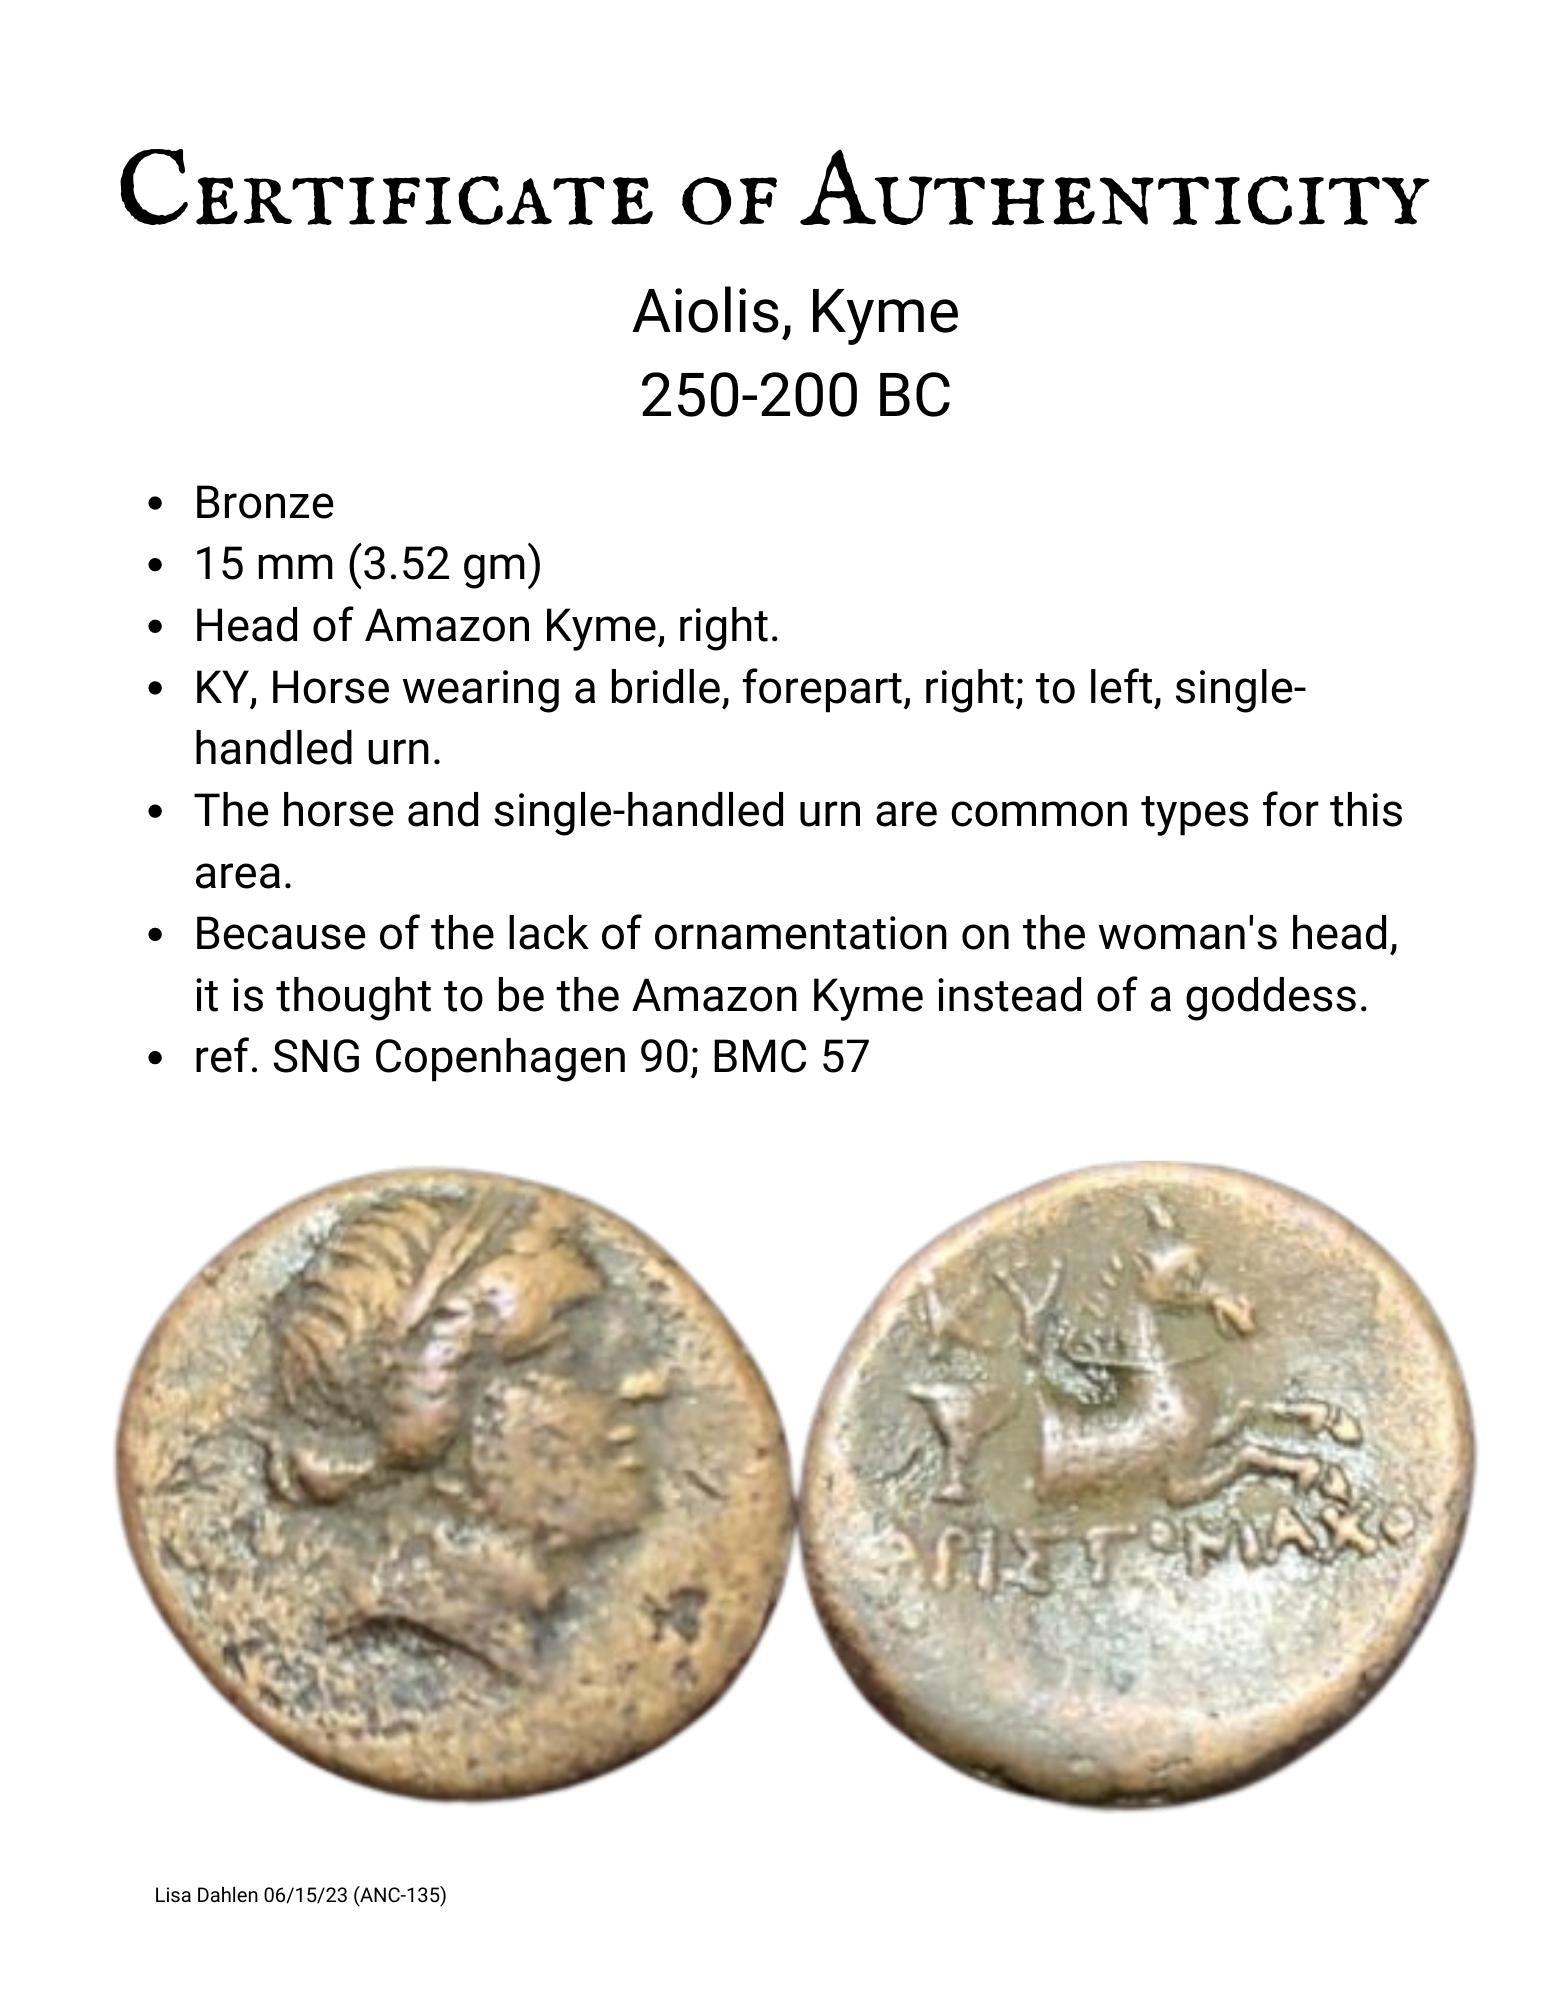 Certificate of authenticity of ancient Greek bronze coin from Aiolis, Kyme 250-200 BC forepart of a horse wearing a bridle and the Amazon Kyme